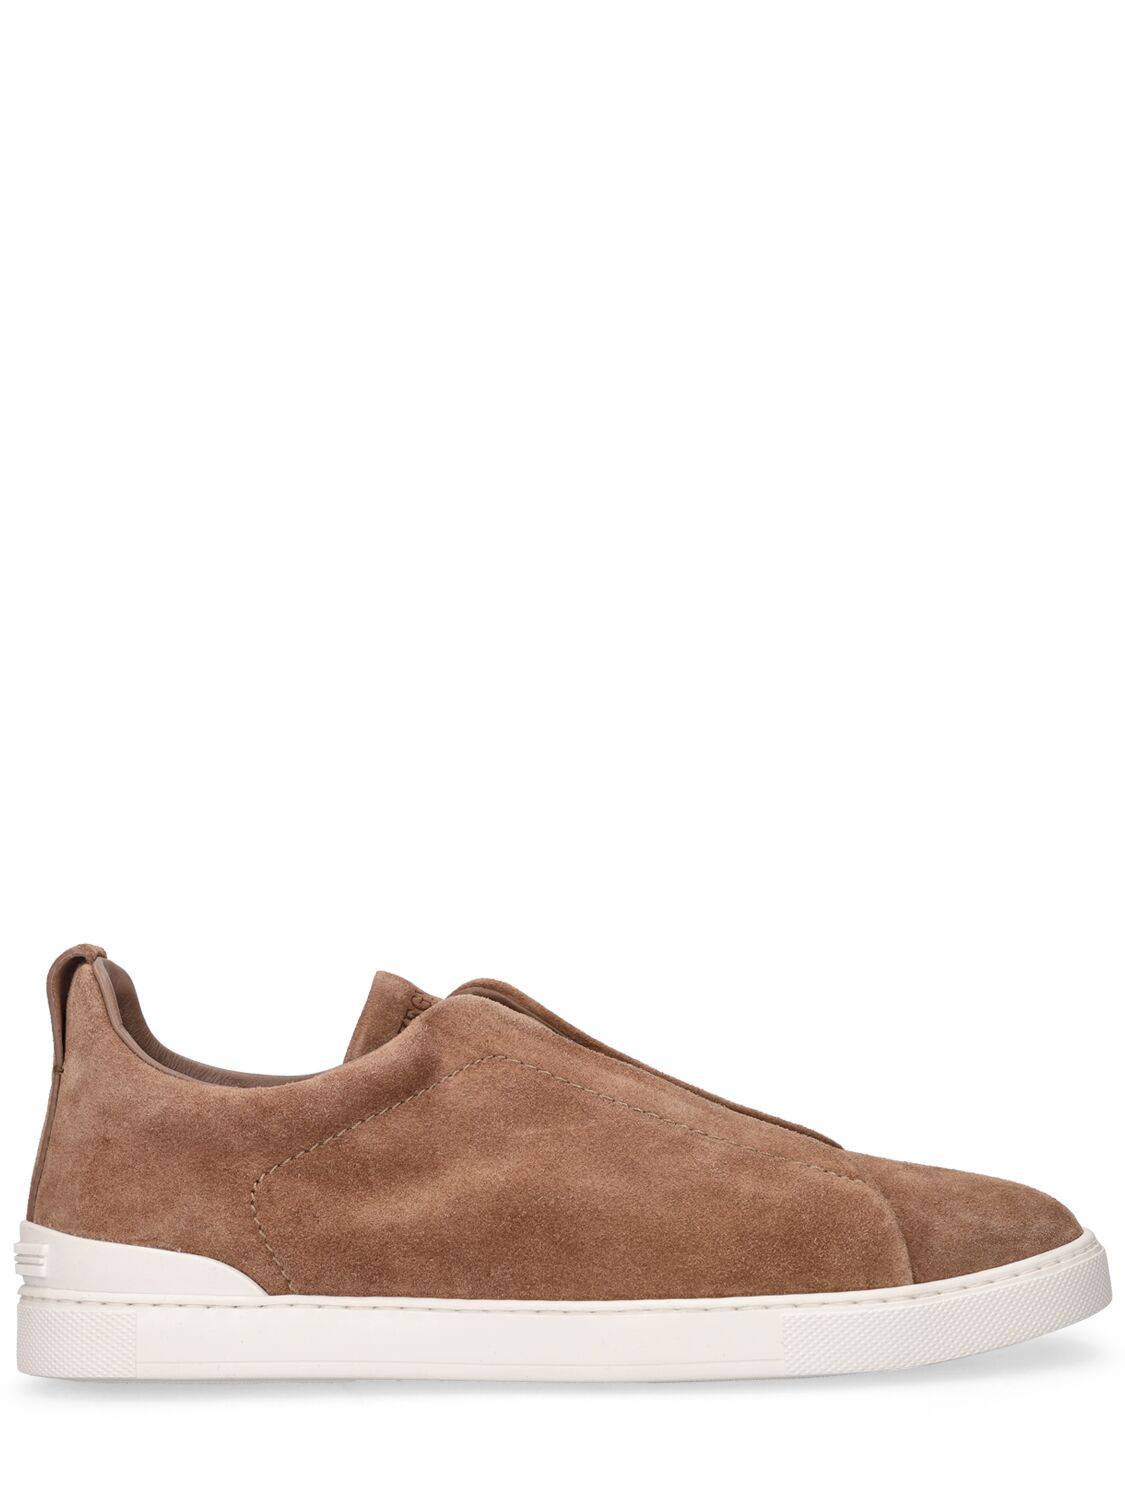 ZEGNA TRIPLE STITCH SUEDE LOW-TOP trainers